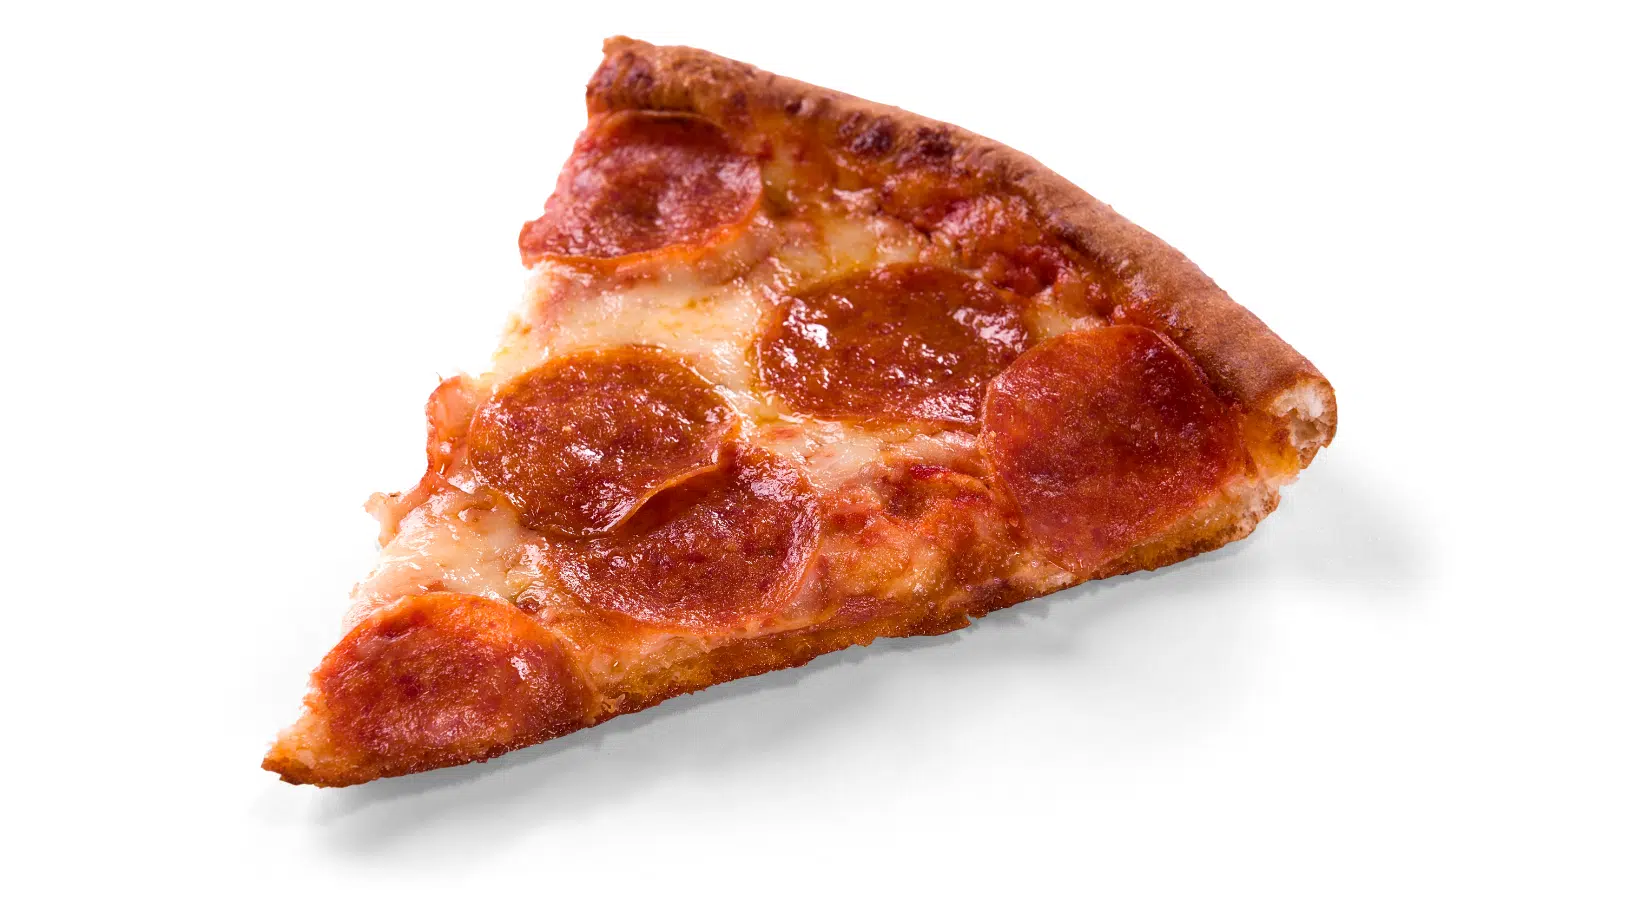 What's For Breakfast? Nutritionist Says Cold Pizza Is Better Than Sugary Cereal...